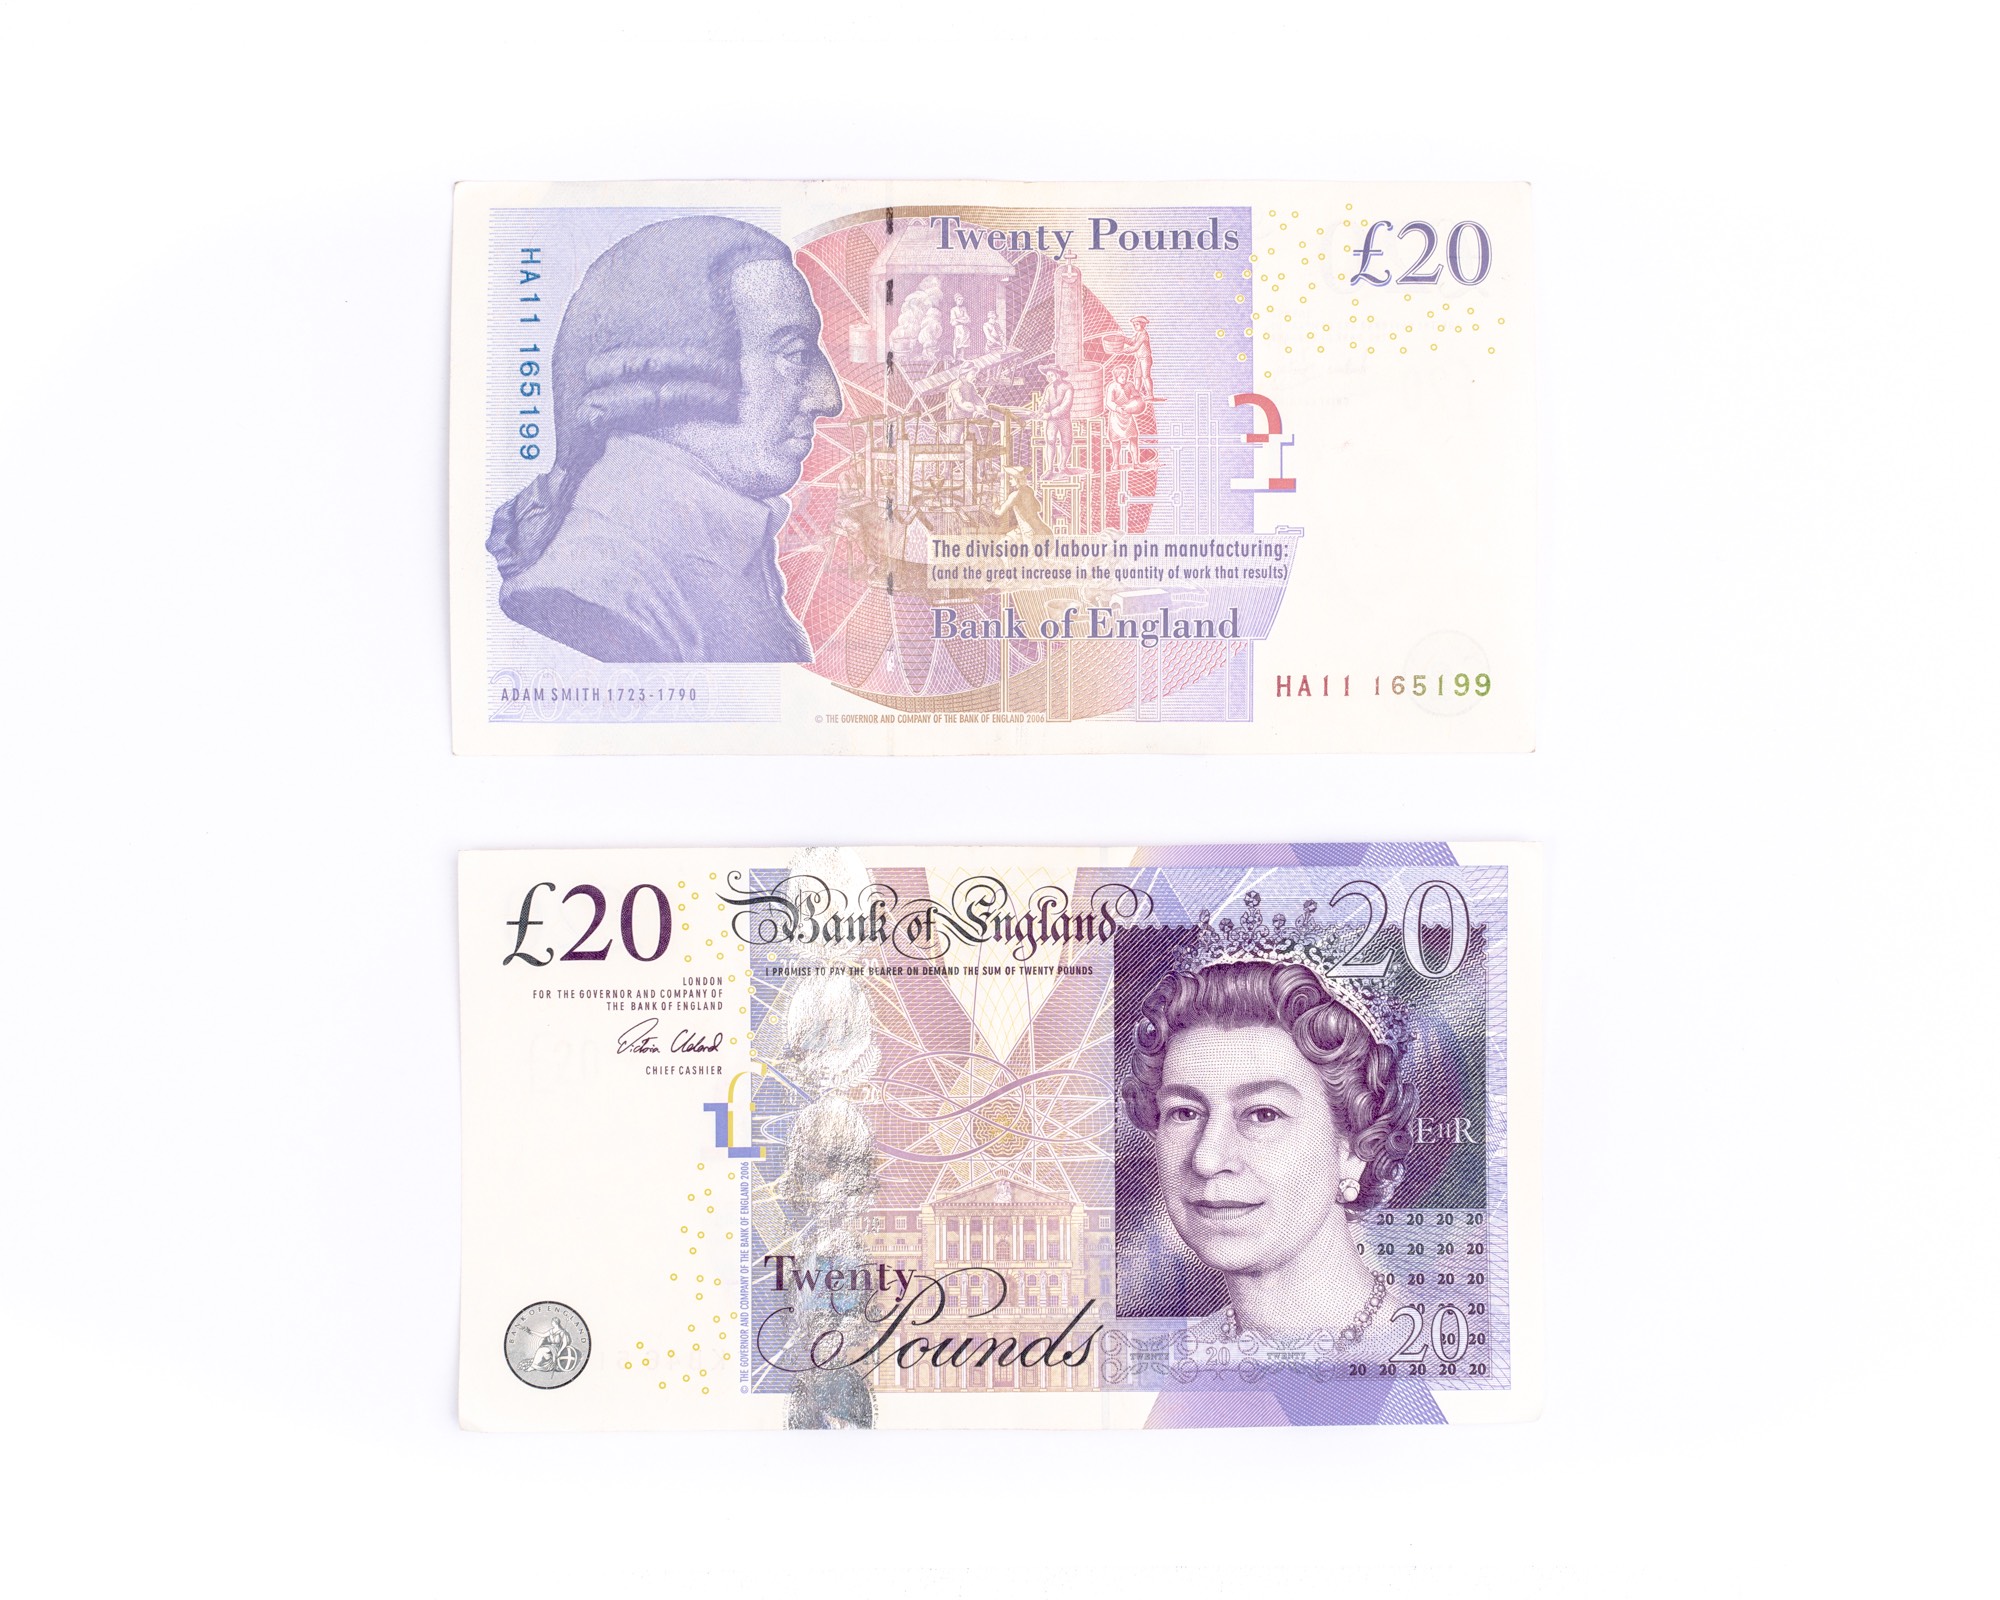 The currency in Scotland is the pound sterling and they come in bank notes and coins.